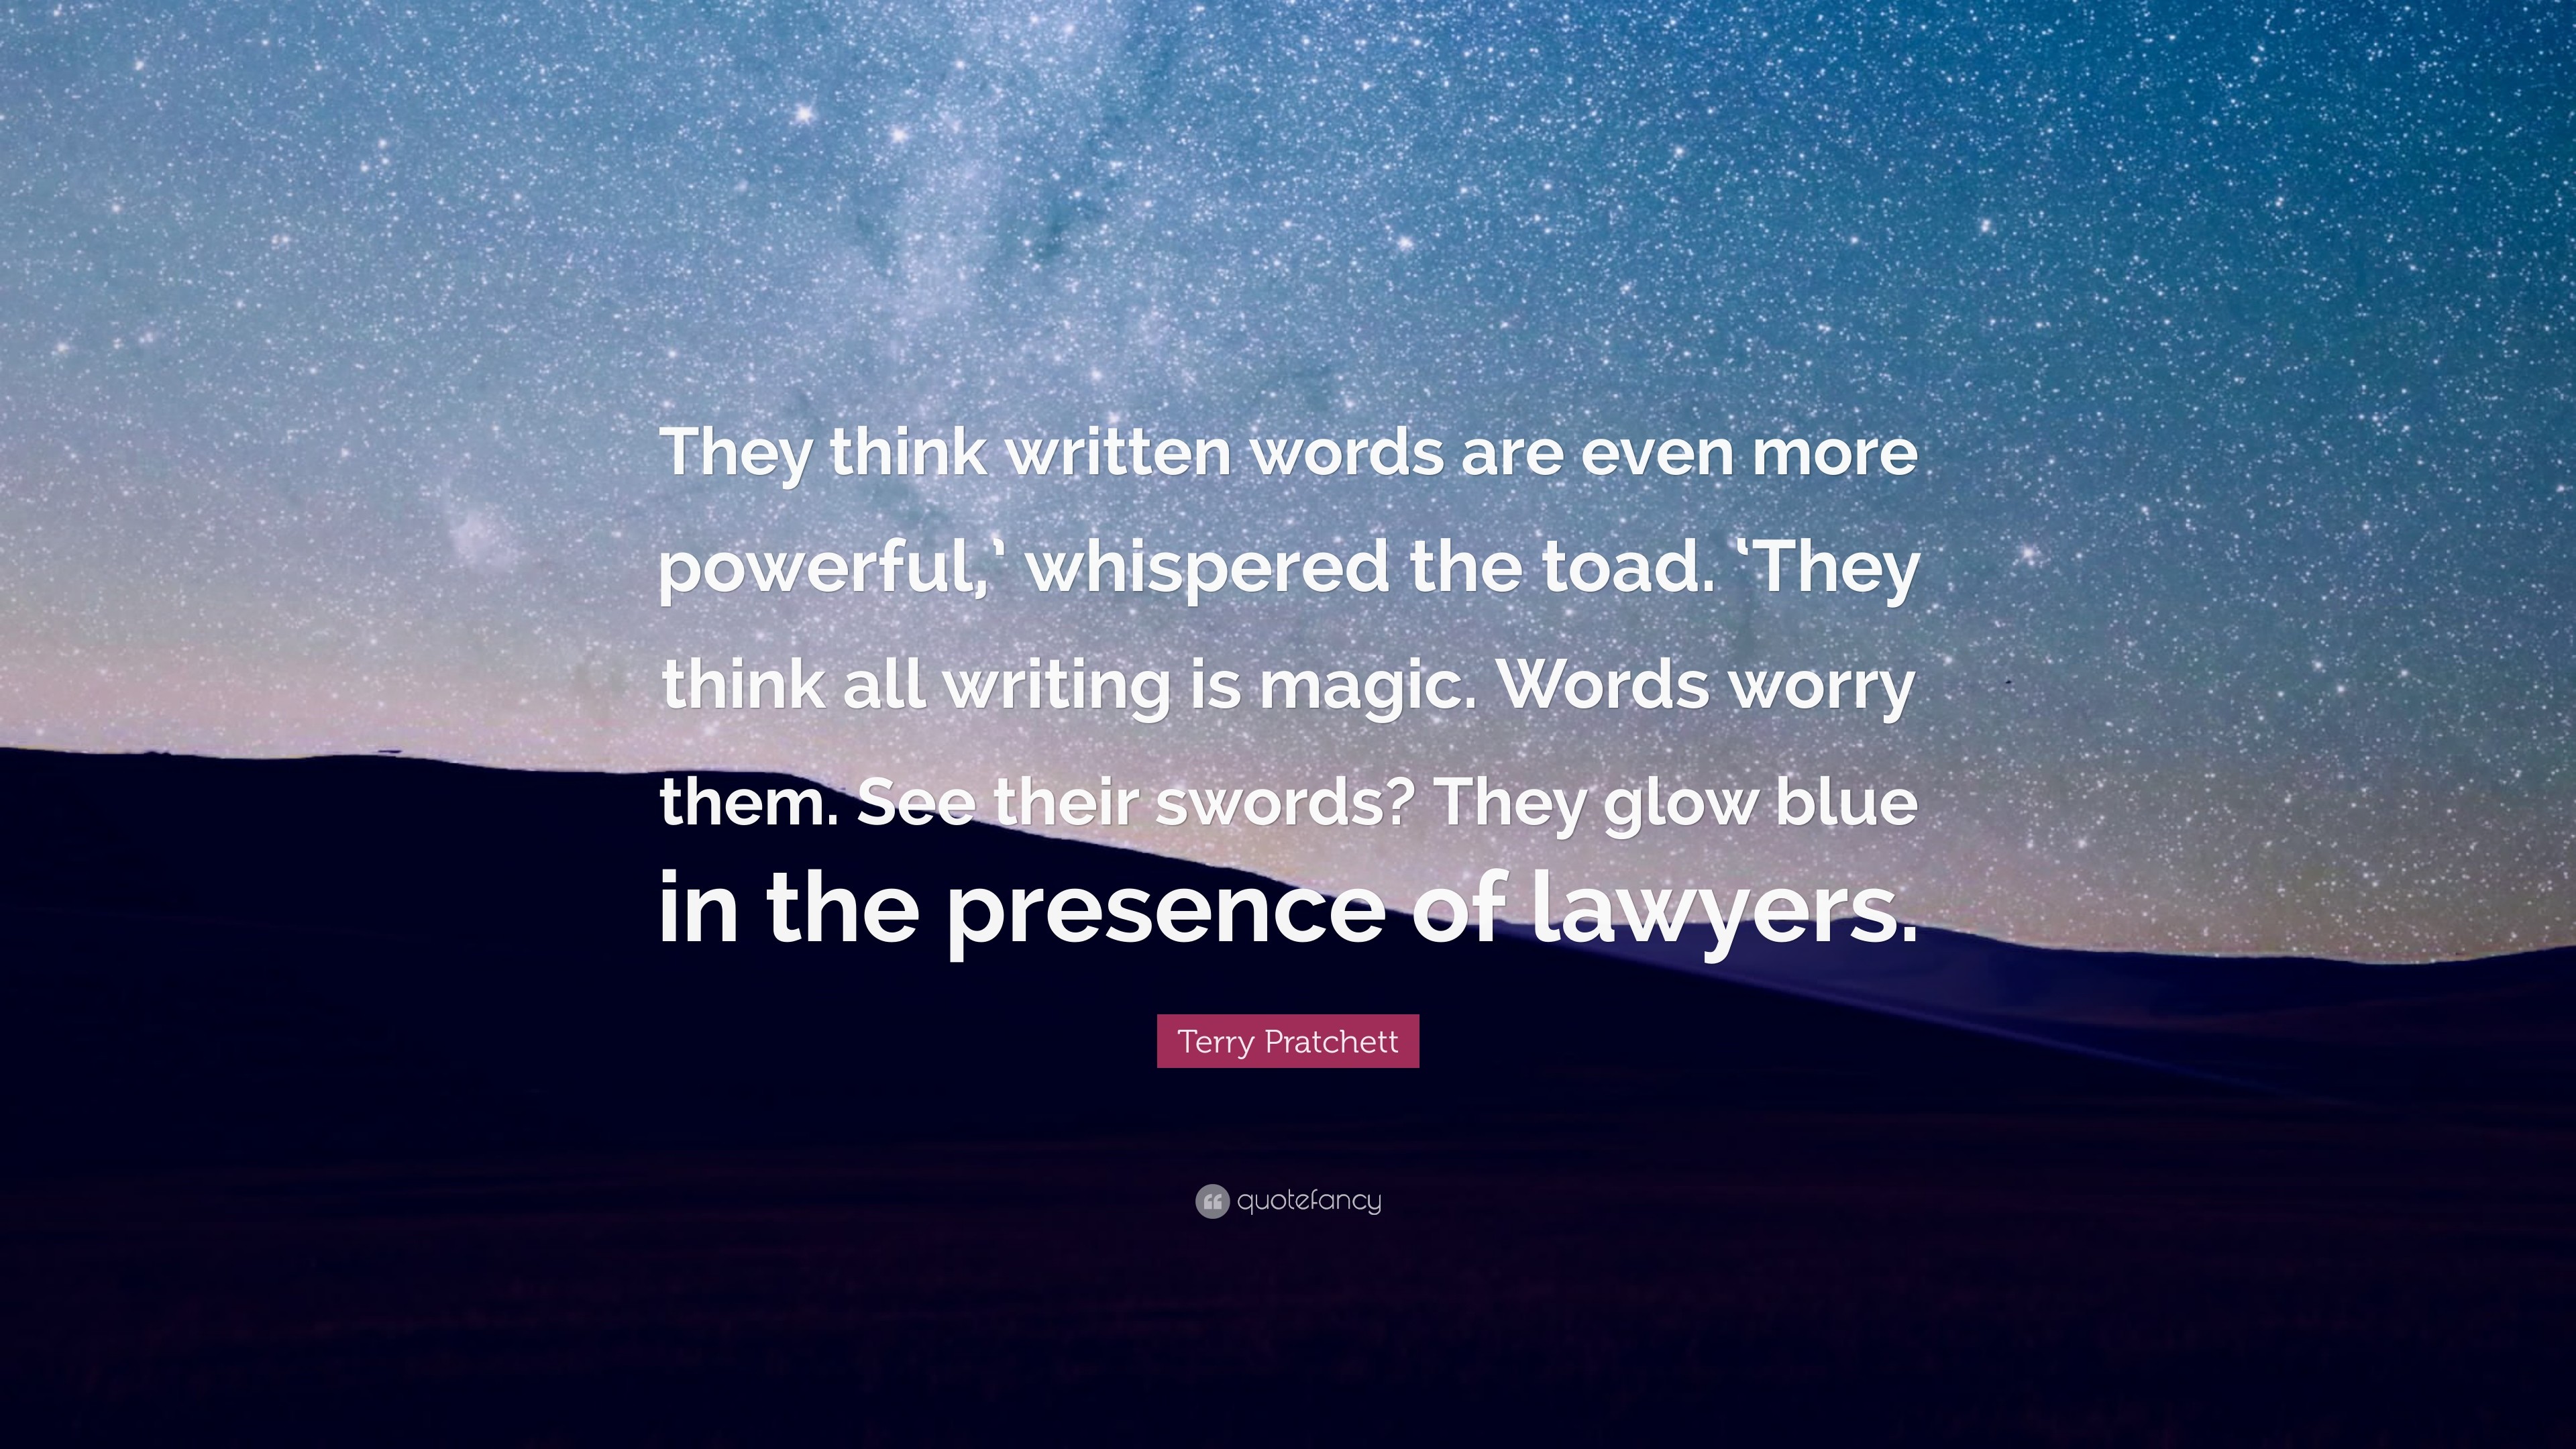 3840x2160 Terry Pratchett Quote: “They think written words are even more powerful,'  whispered